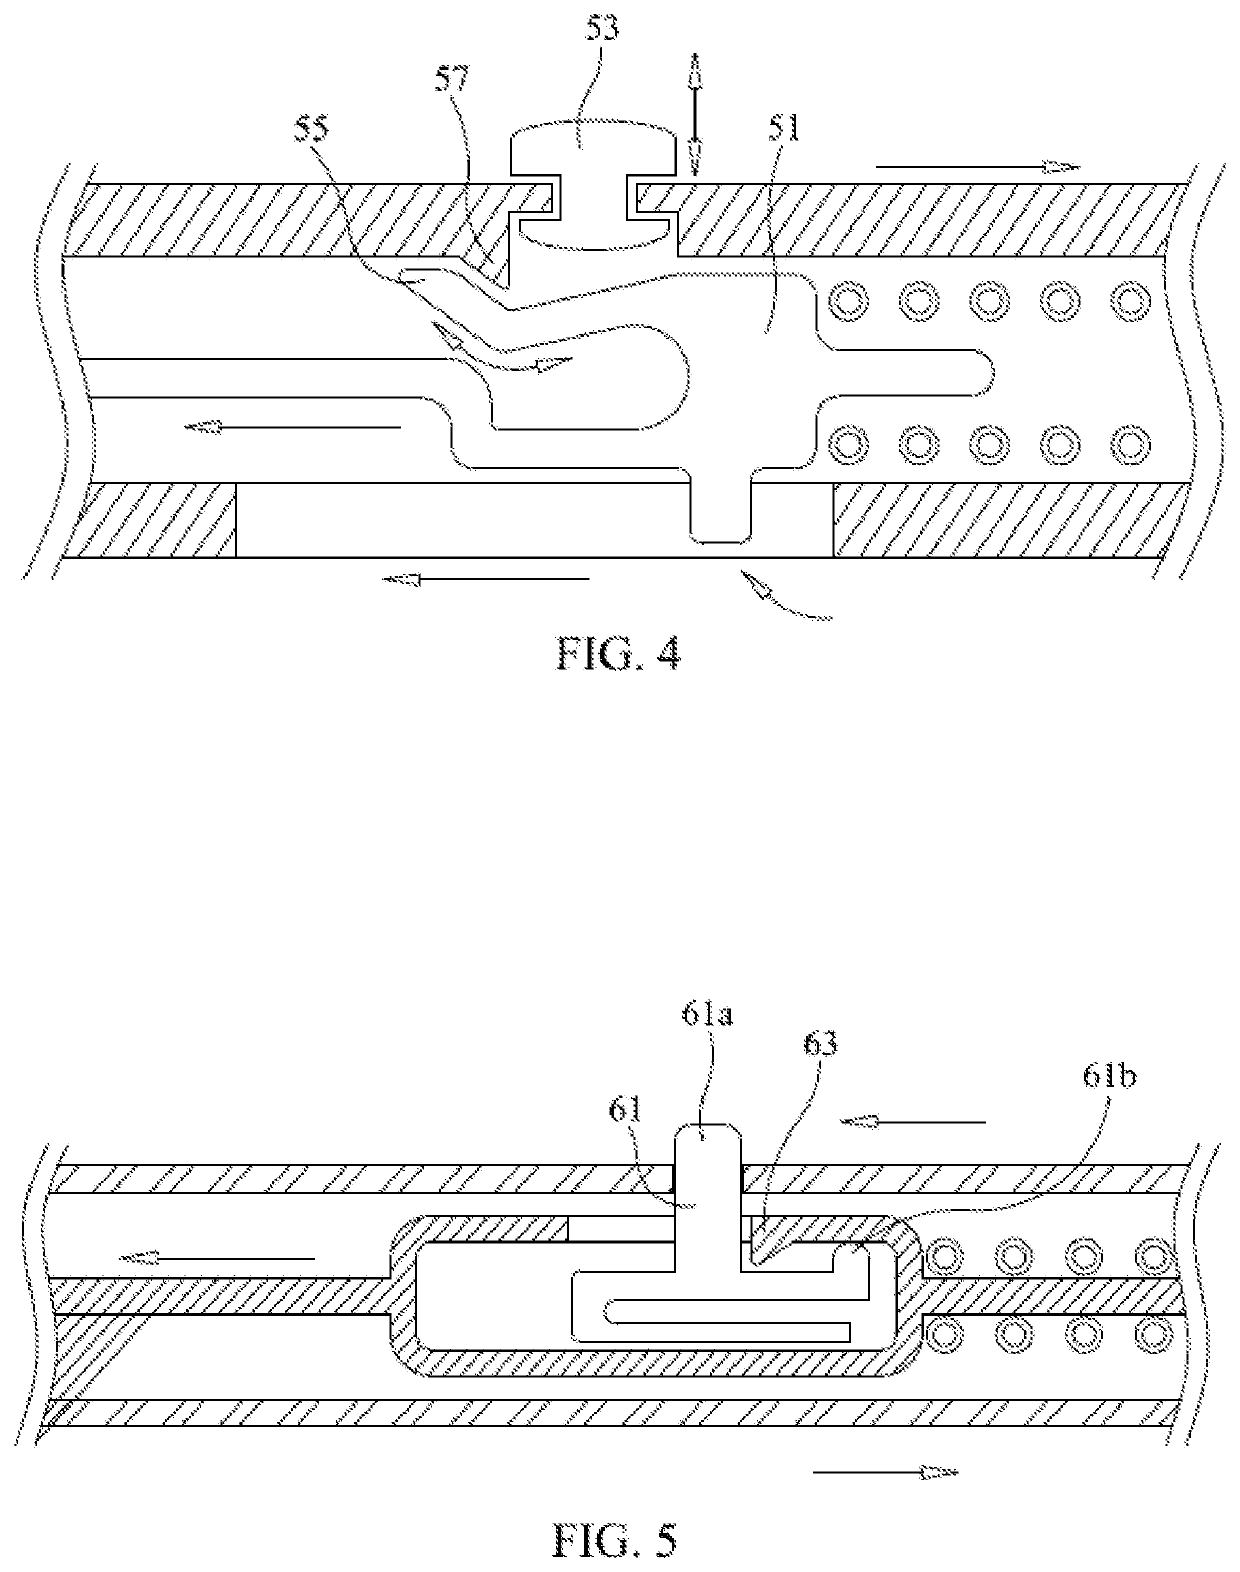 Device, method, and system for automated dispensing of periodontal medication